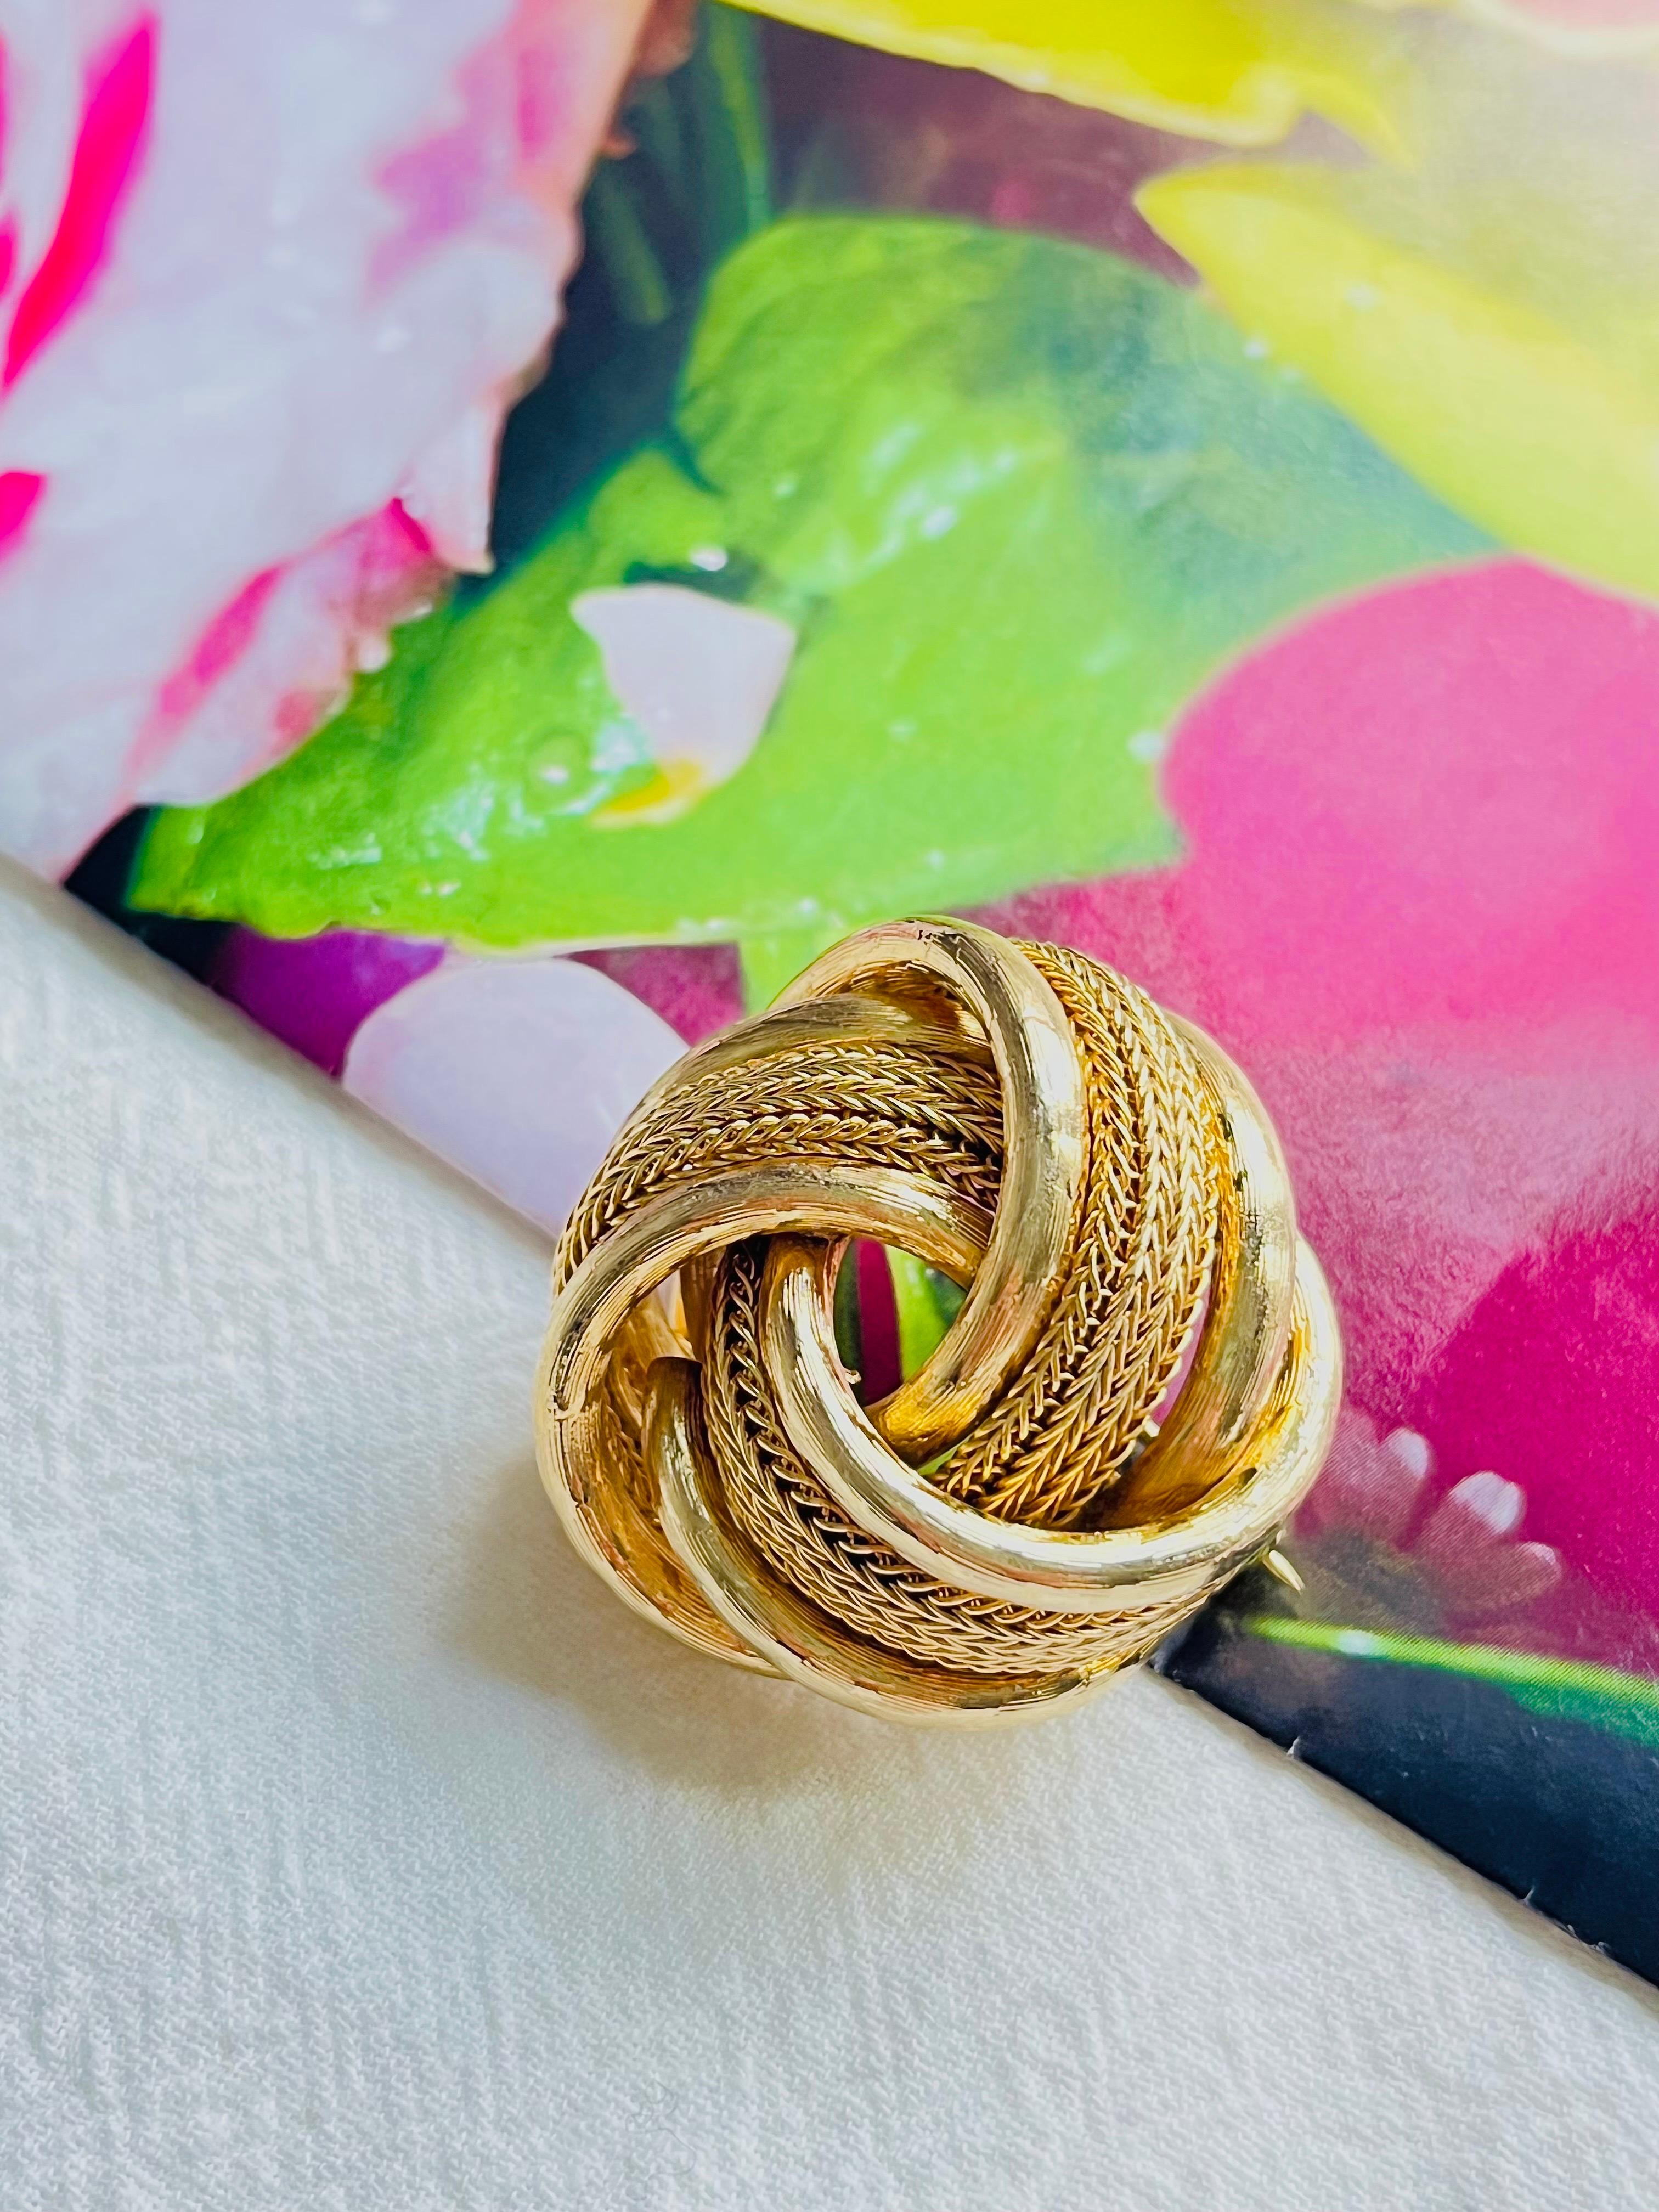 Christian Dior GROSSE 1963 Vintage Knot Rope Glow Mesh Swirl Twist Dome Brooch In Excellent Condition For Sale In Wokingham, England